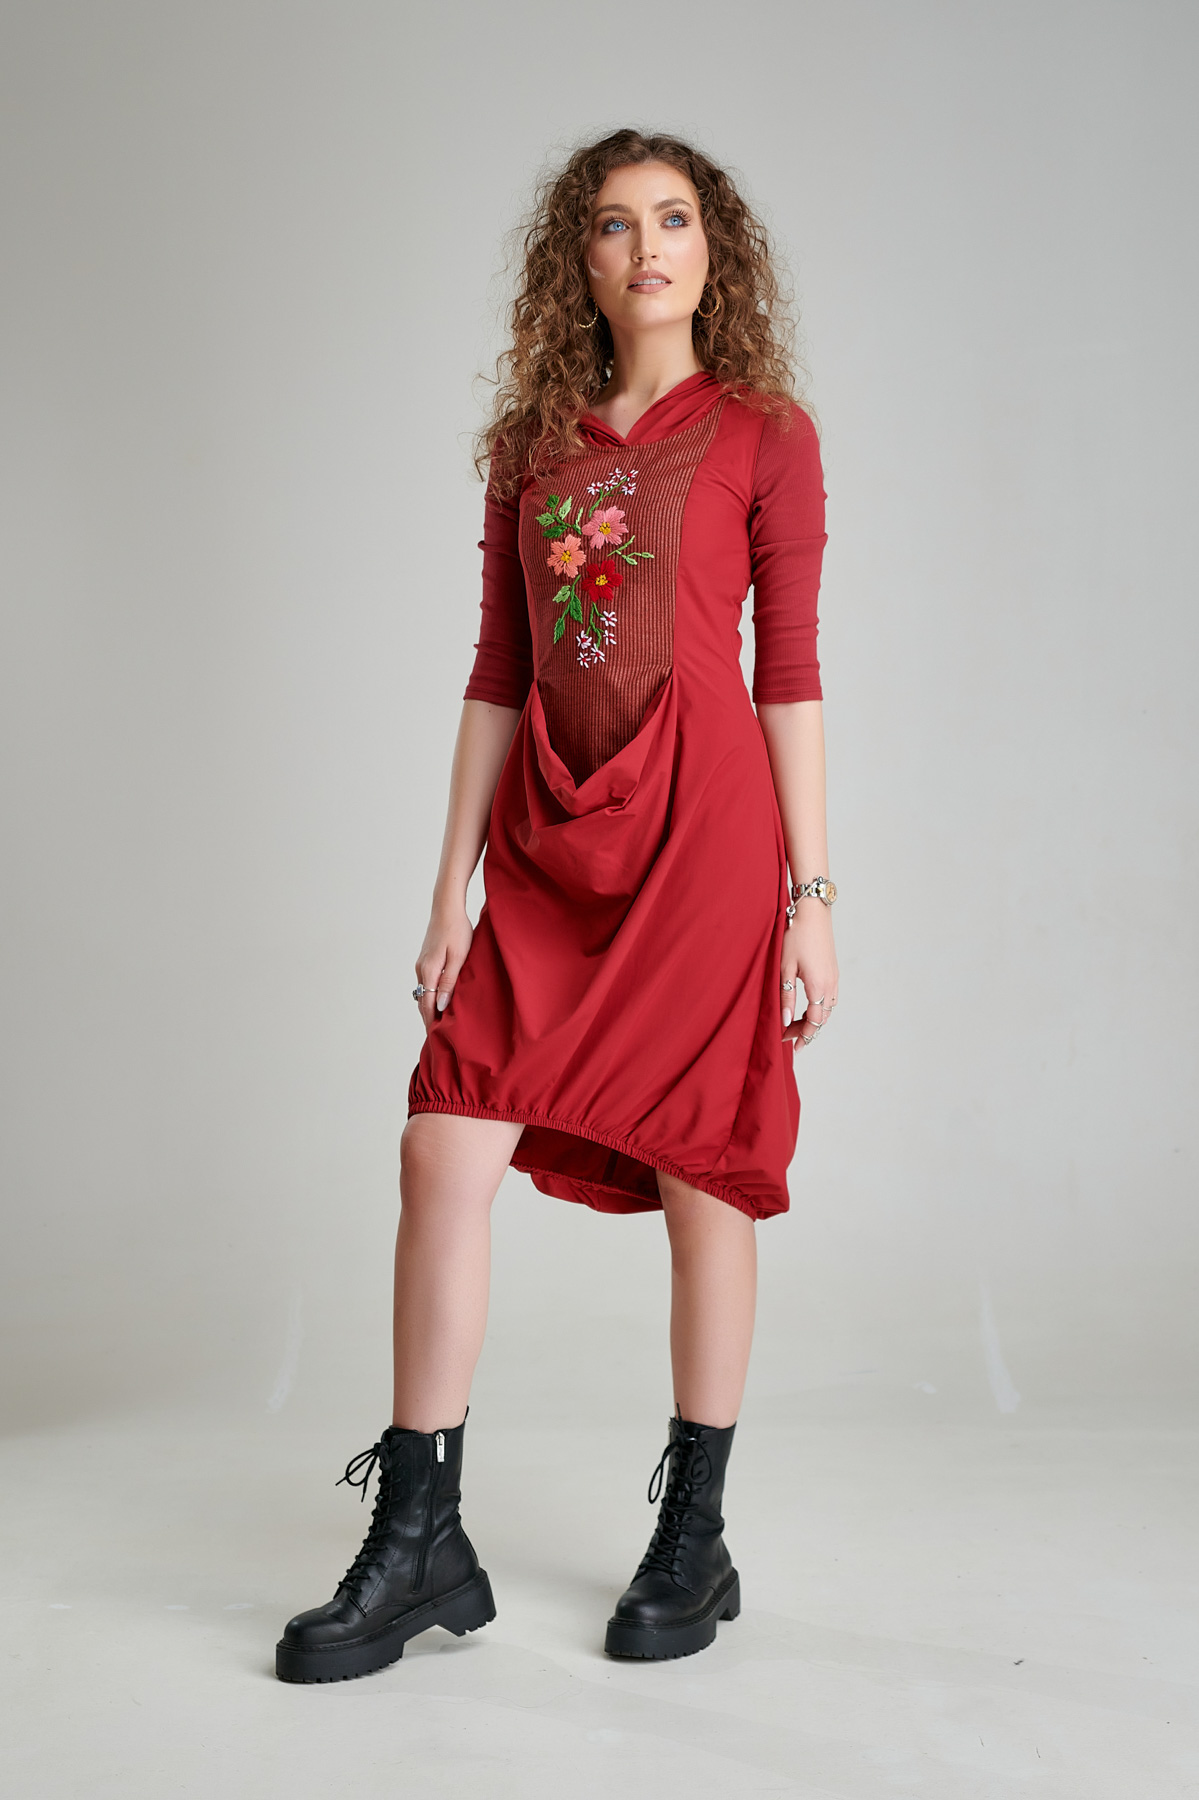 MARIMAR casual dress with hood and floral embroidery. Natural fabrics, original design, handmade embroidery